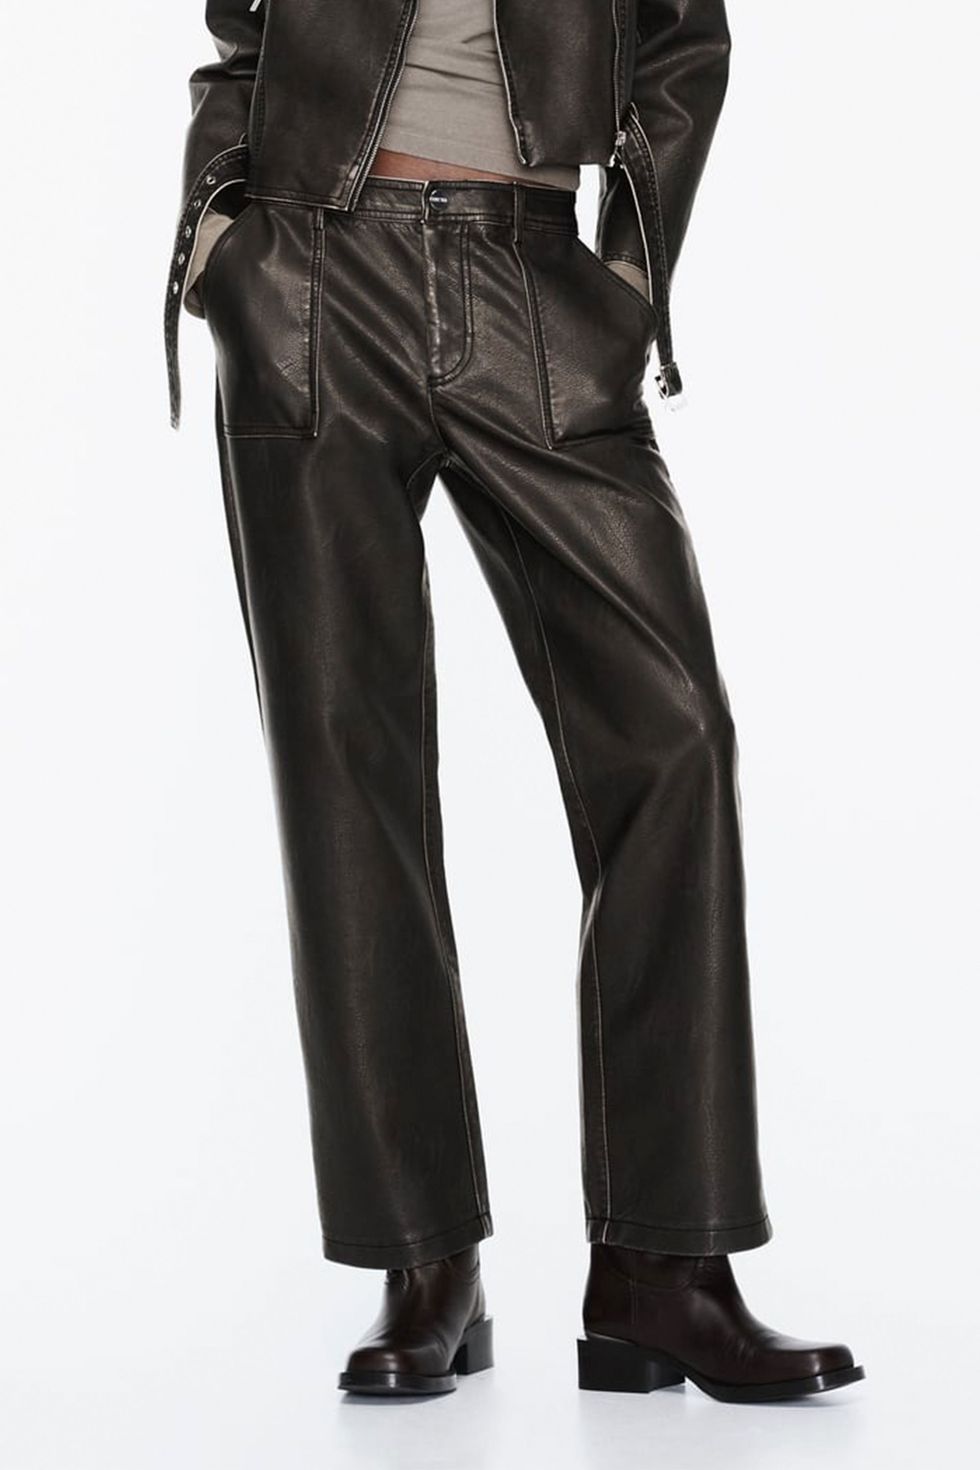 Only Petite faux leather side split flared pants in black